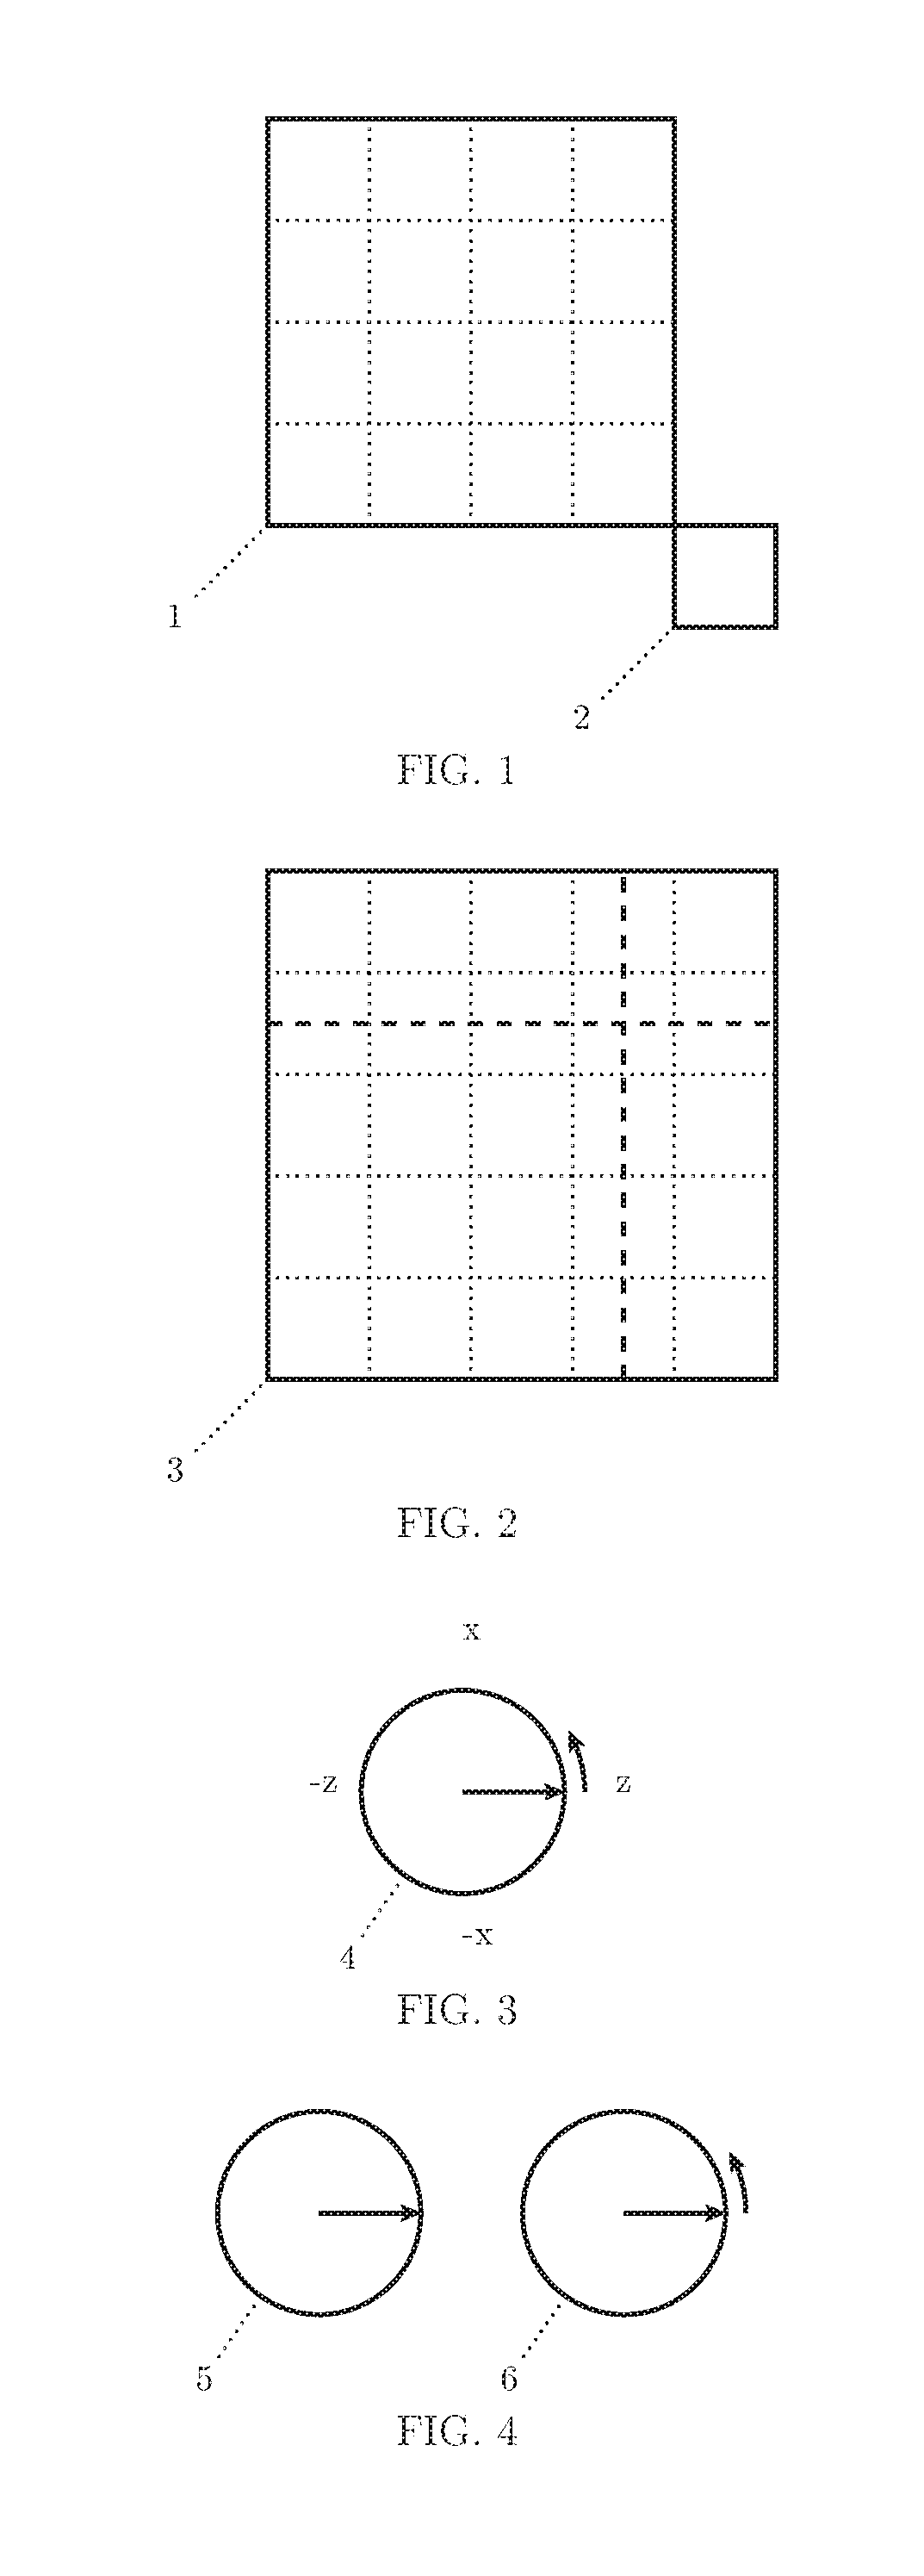 System and method for solving 3sat using a quantum computer